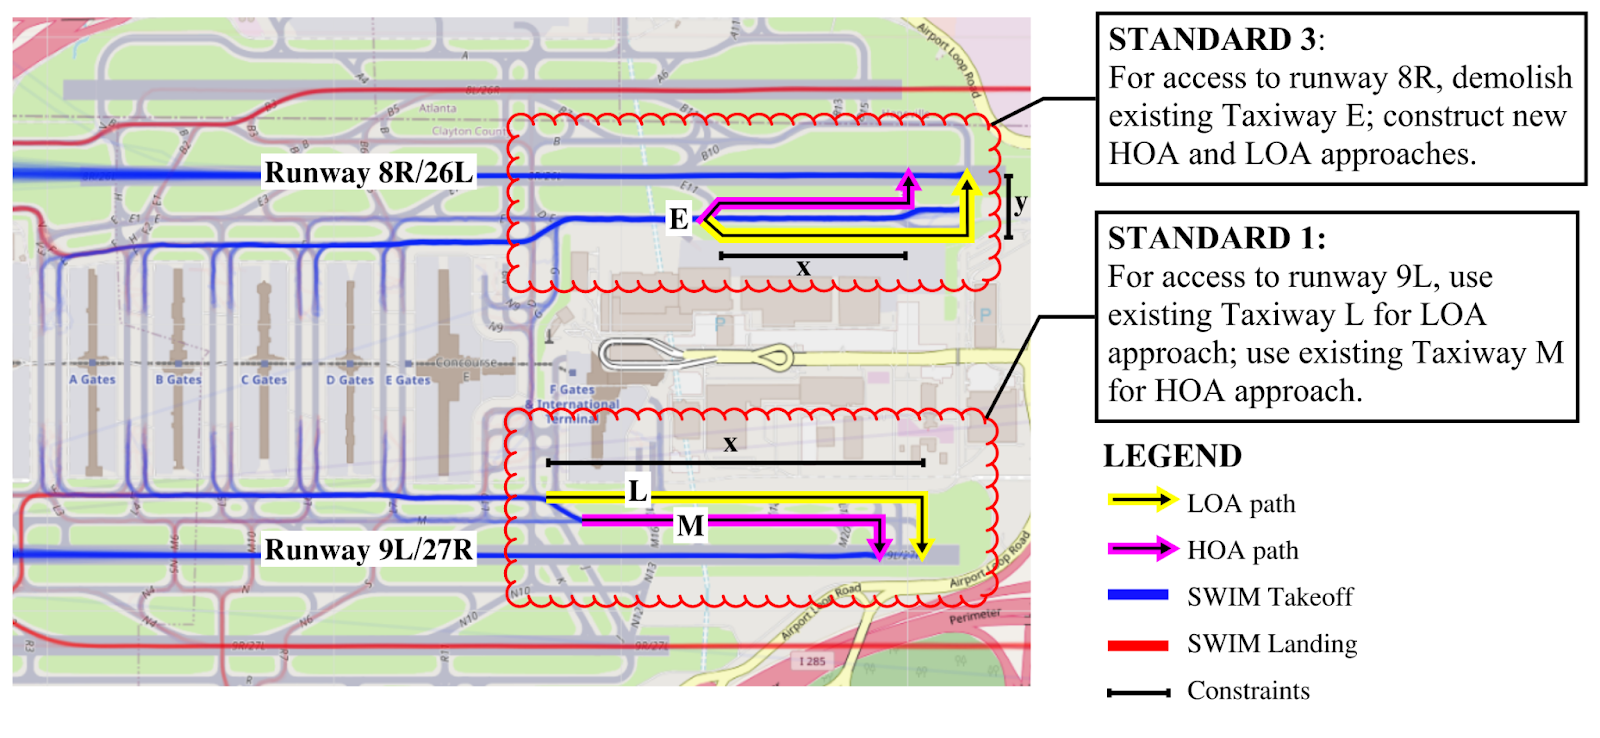 A schematic of how High Occupancy Aircraft (HOA) and Low Occupancy Aircraft (LOA) departure queues could be separated at ATL airport, requiring traffic flow reconfiguration on the southern runway and retrofitting on the northern runway.